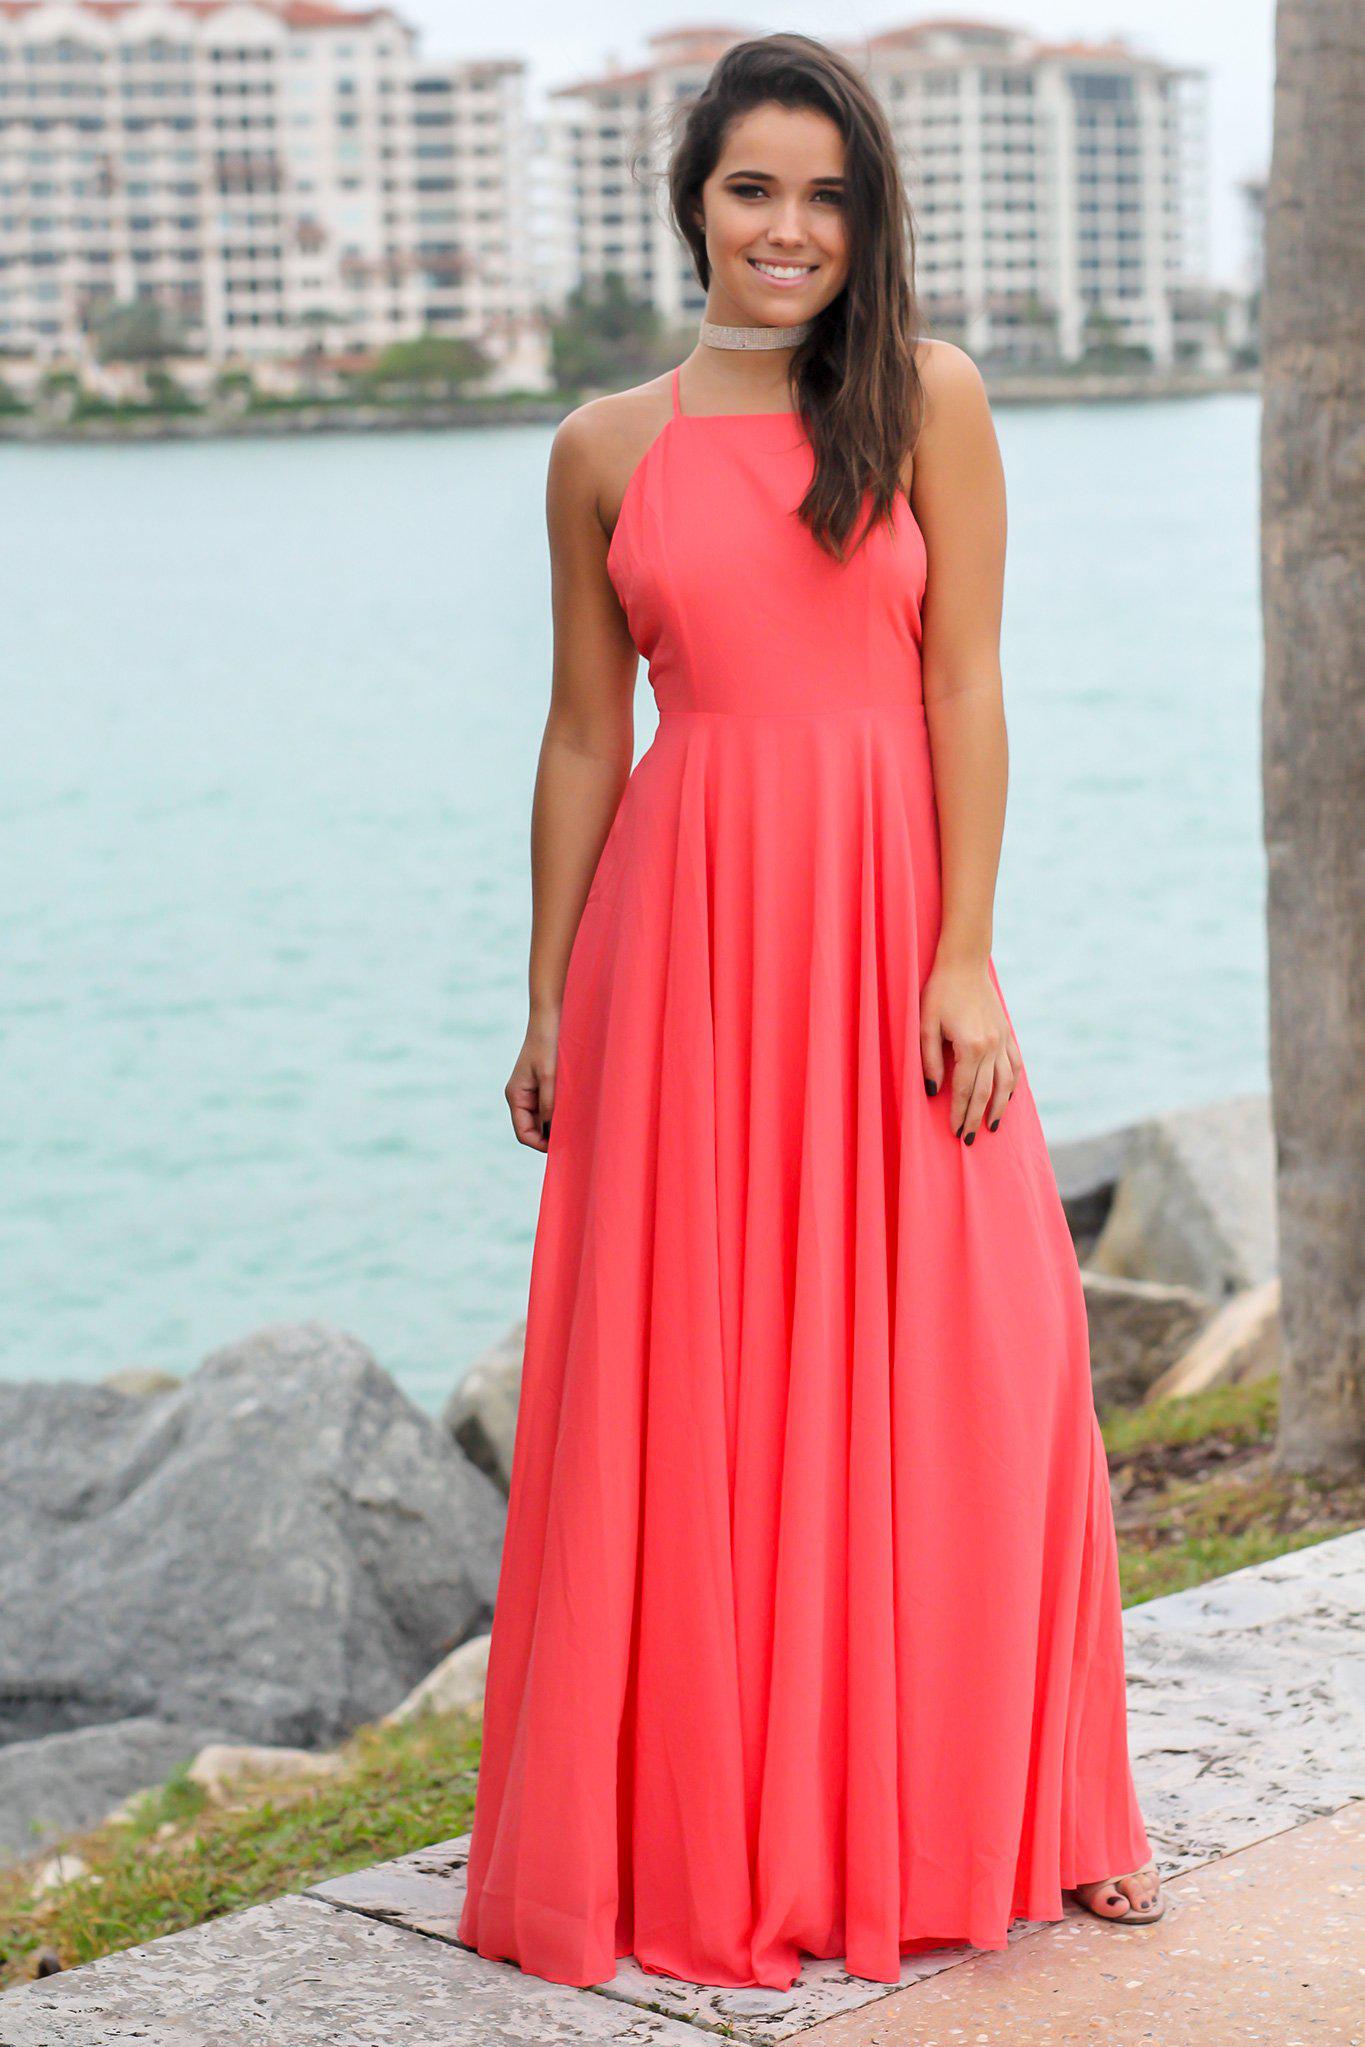 Wedding Coral Colour Dress - youronlinesportsguide